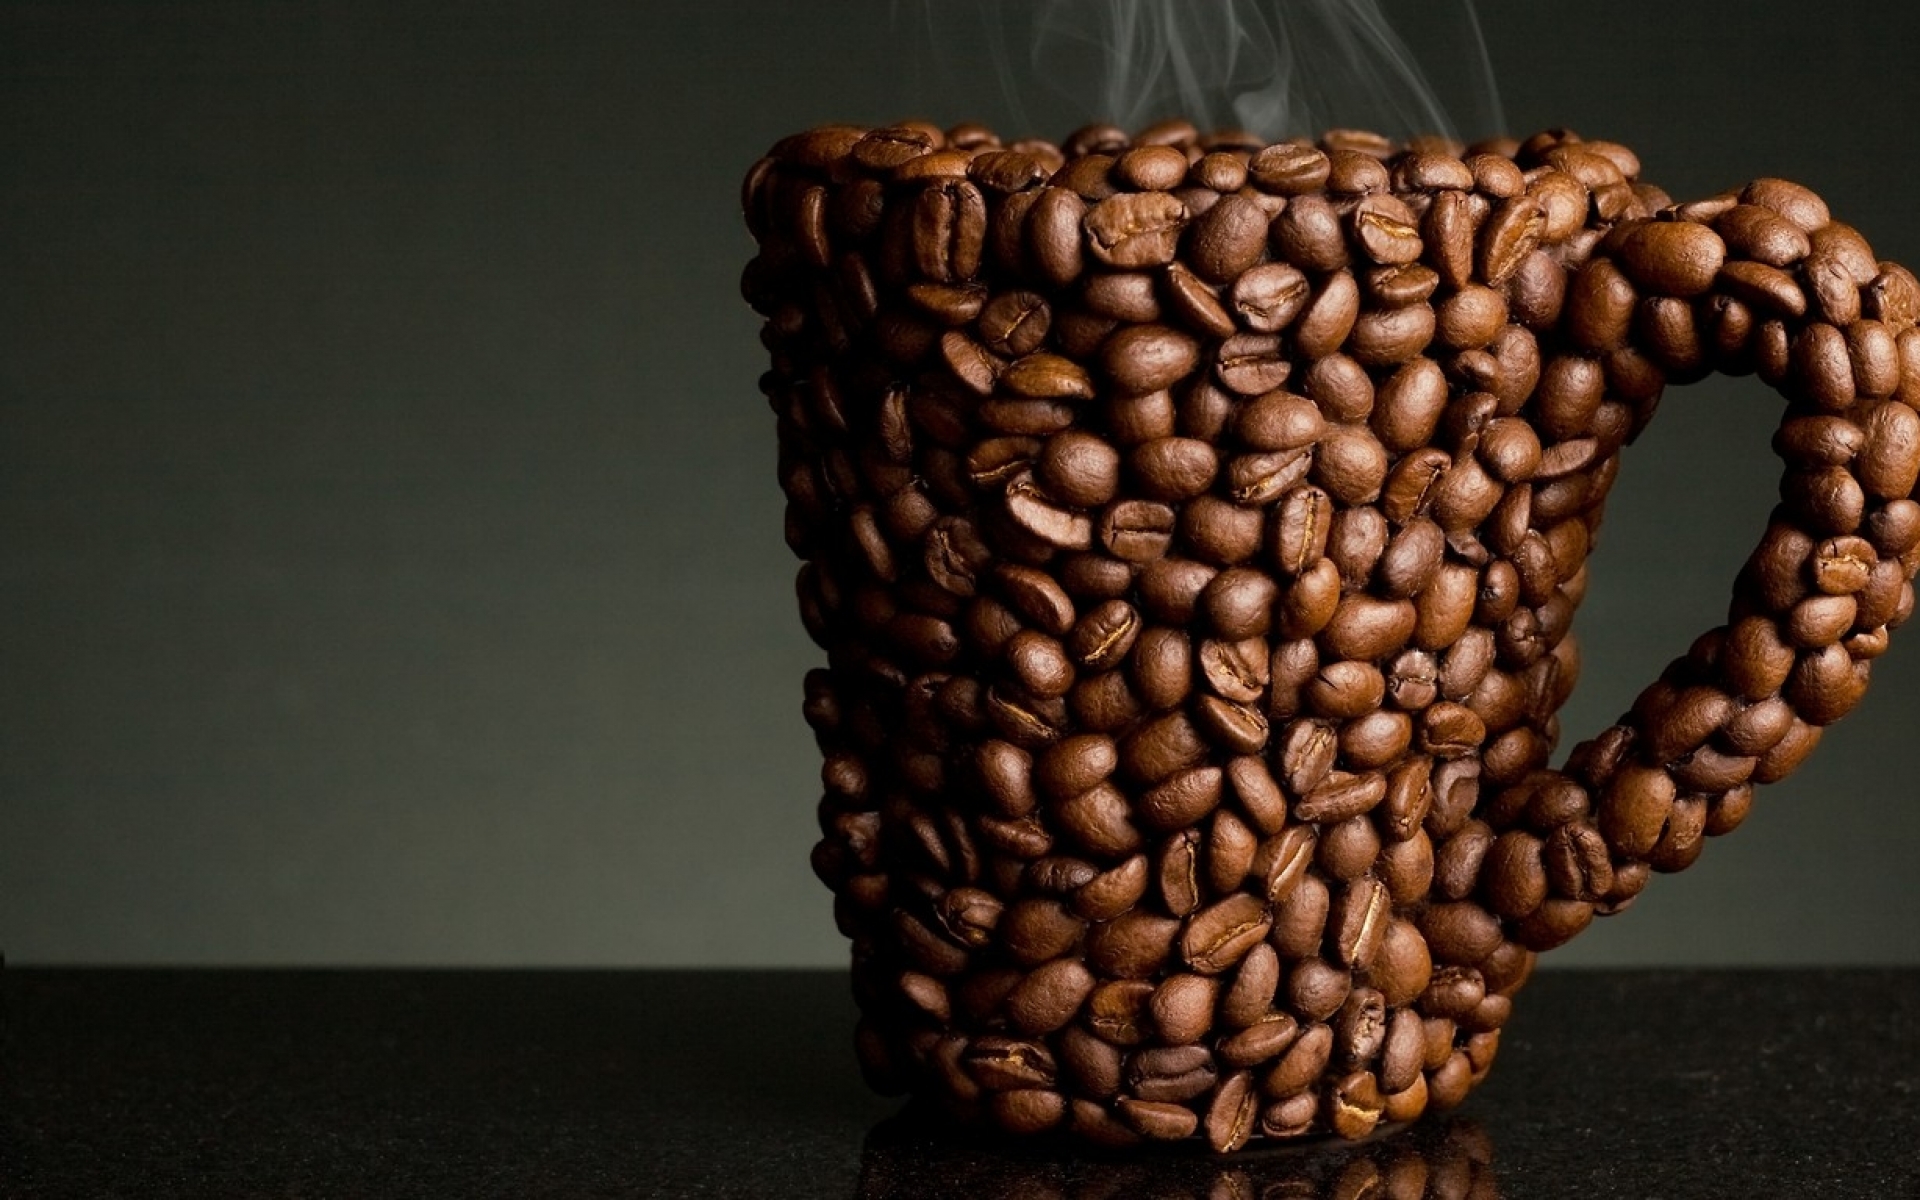 1920x1200 Abstract Coffee Beans Cup desktop PC and Mac wallpaper